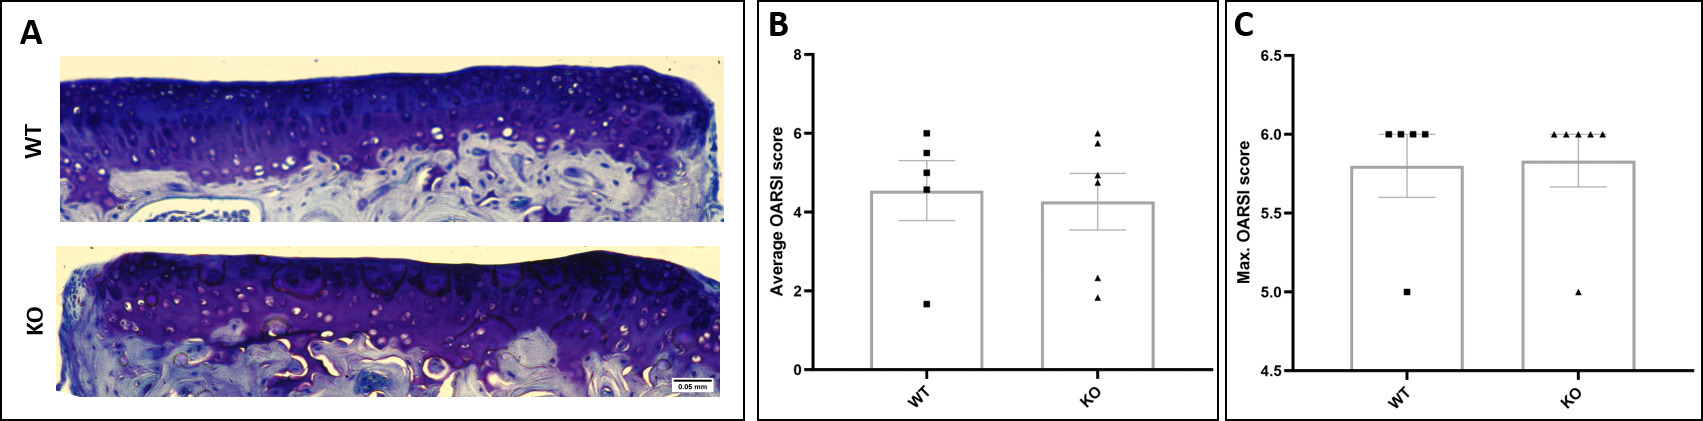 Fig. 5 
            Deletion of Socs2 does not prevent osteoarthritic articular cartilage lesions from ageing. a) Toluidine blue stained sections of the knee joint of 12- to 13-month-old WT and Socs2-/- (knockout (KO)) mice showing development of articular cartilage lesions in the medial tibia (10×). b) Mean articular cartilage damage Osteoarthritis Research Society International (OARSI) score across the knee joint and c) maximum articular cartilage damage OARSI score between wild type (WT) (n = 5) and KO (n = 6) mice with ageing, in the medial tibia of the knee joint. Scale bar = 0.05 mm. Data are presented as mean and standard error of the mean, and show individual animals; Mann-Whitney U test was used.
          